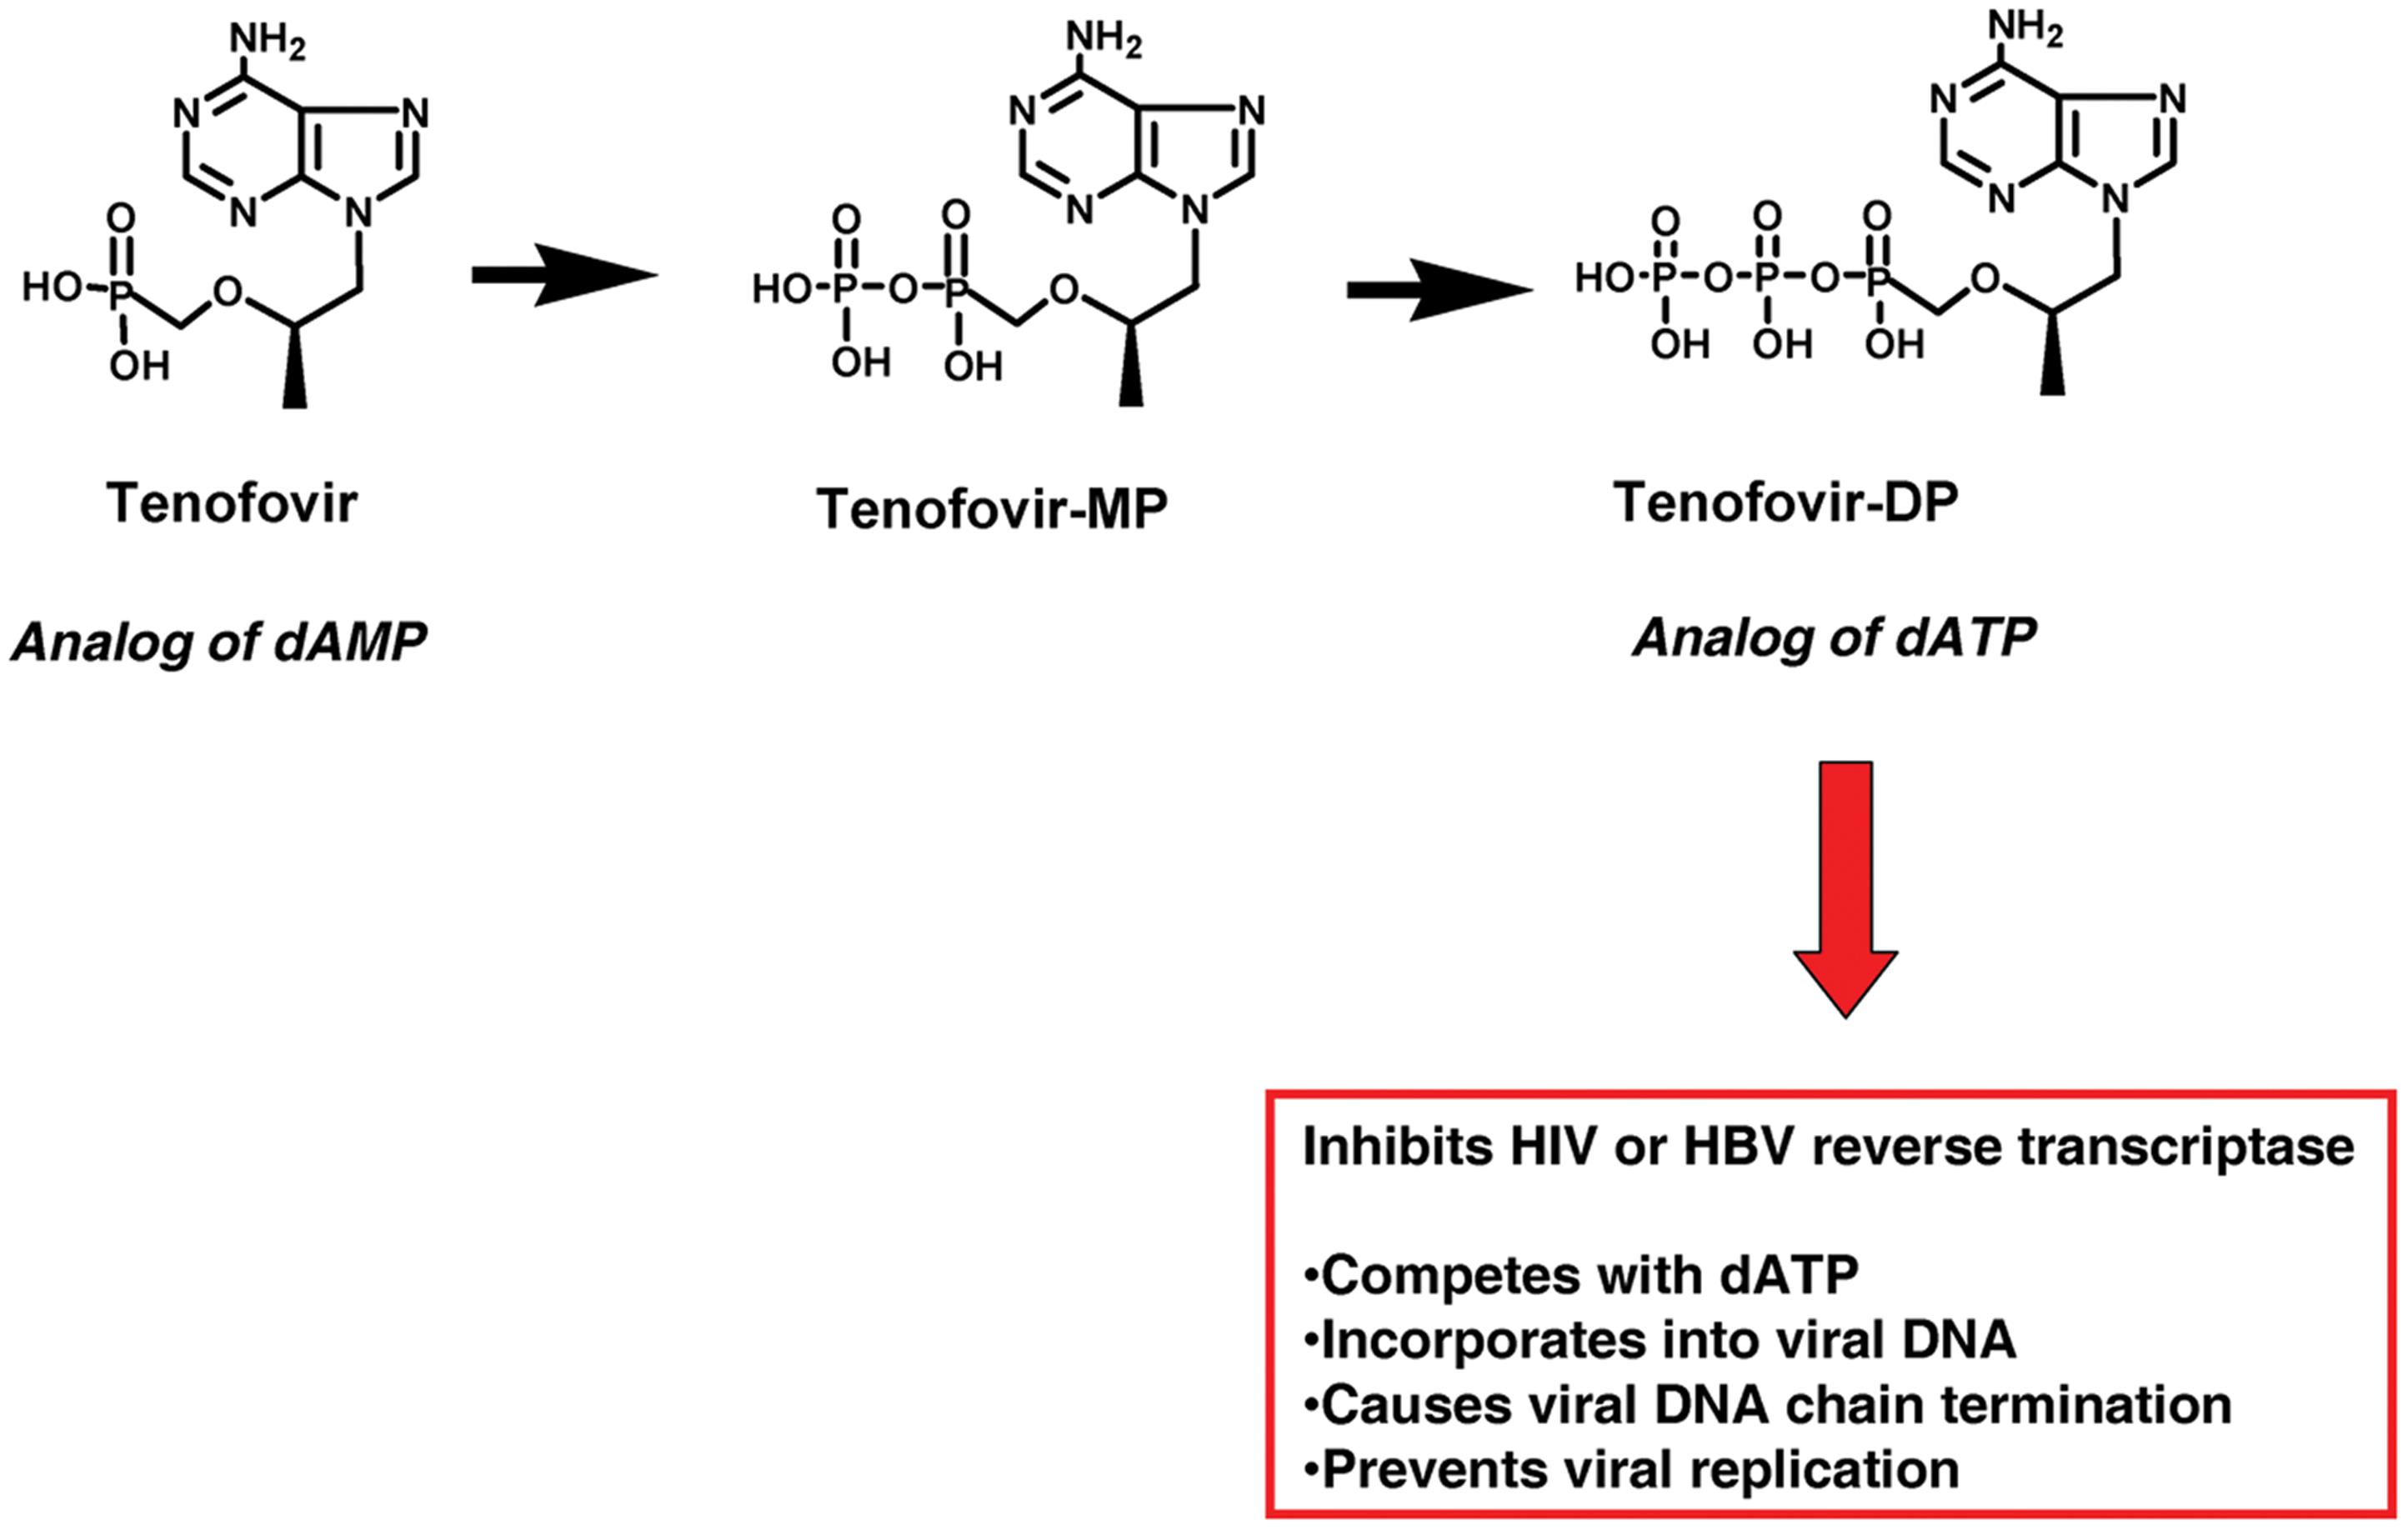 A scheme depicting intracellular activation, and the antiviral mechanism of action of tenofovir